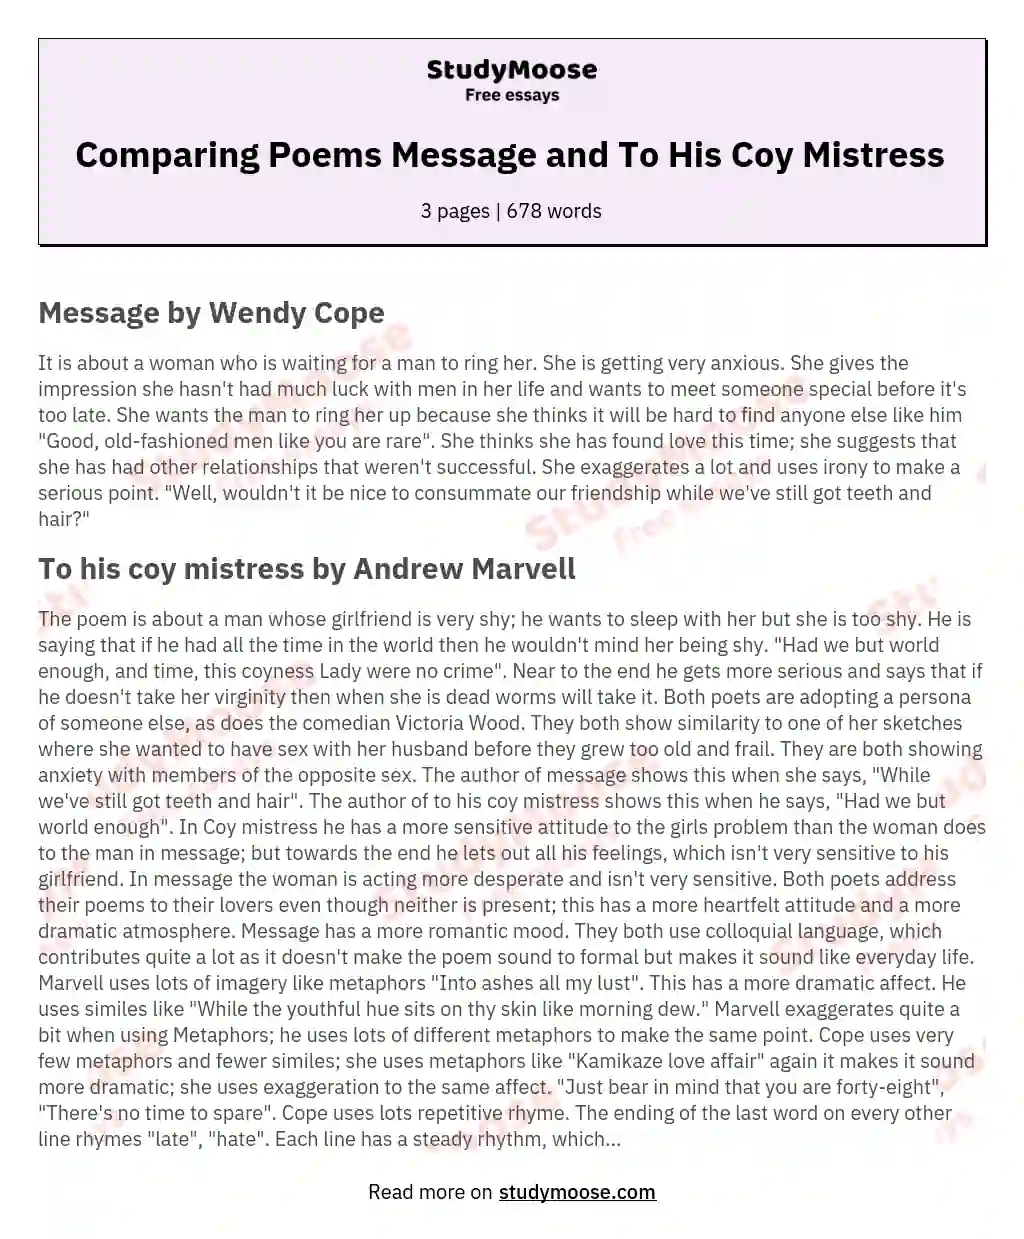 Comparing Poems Message and To His Coy Mistress  essay